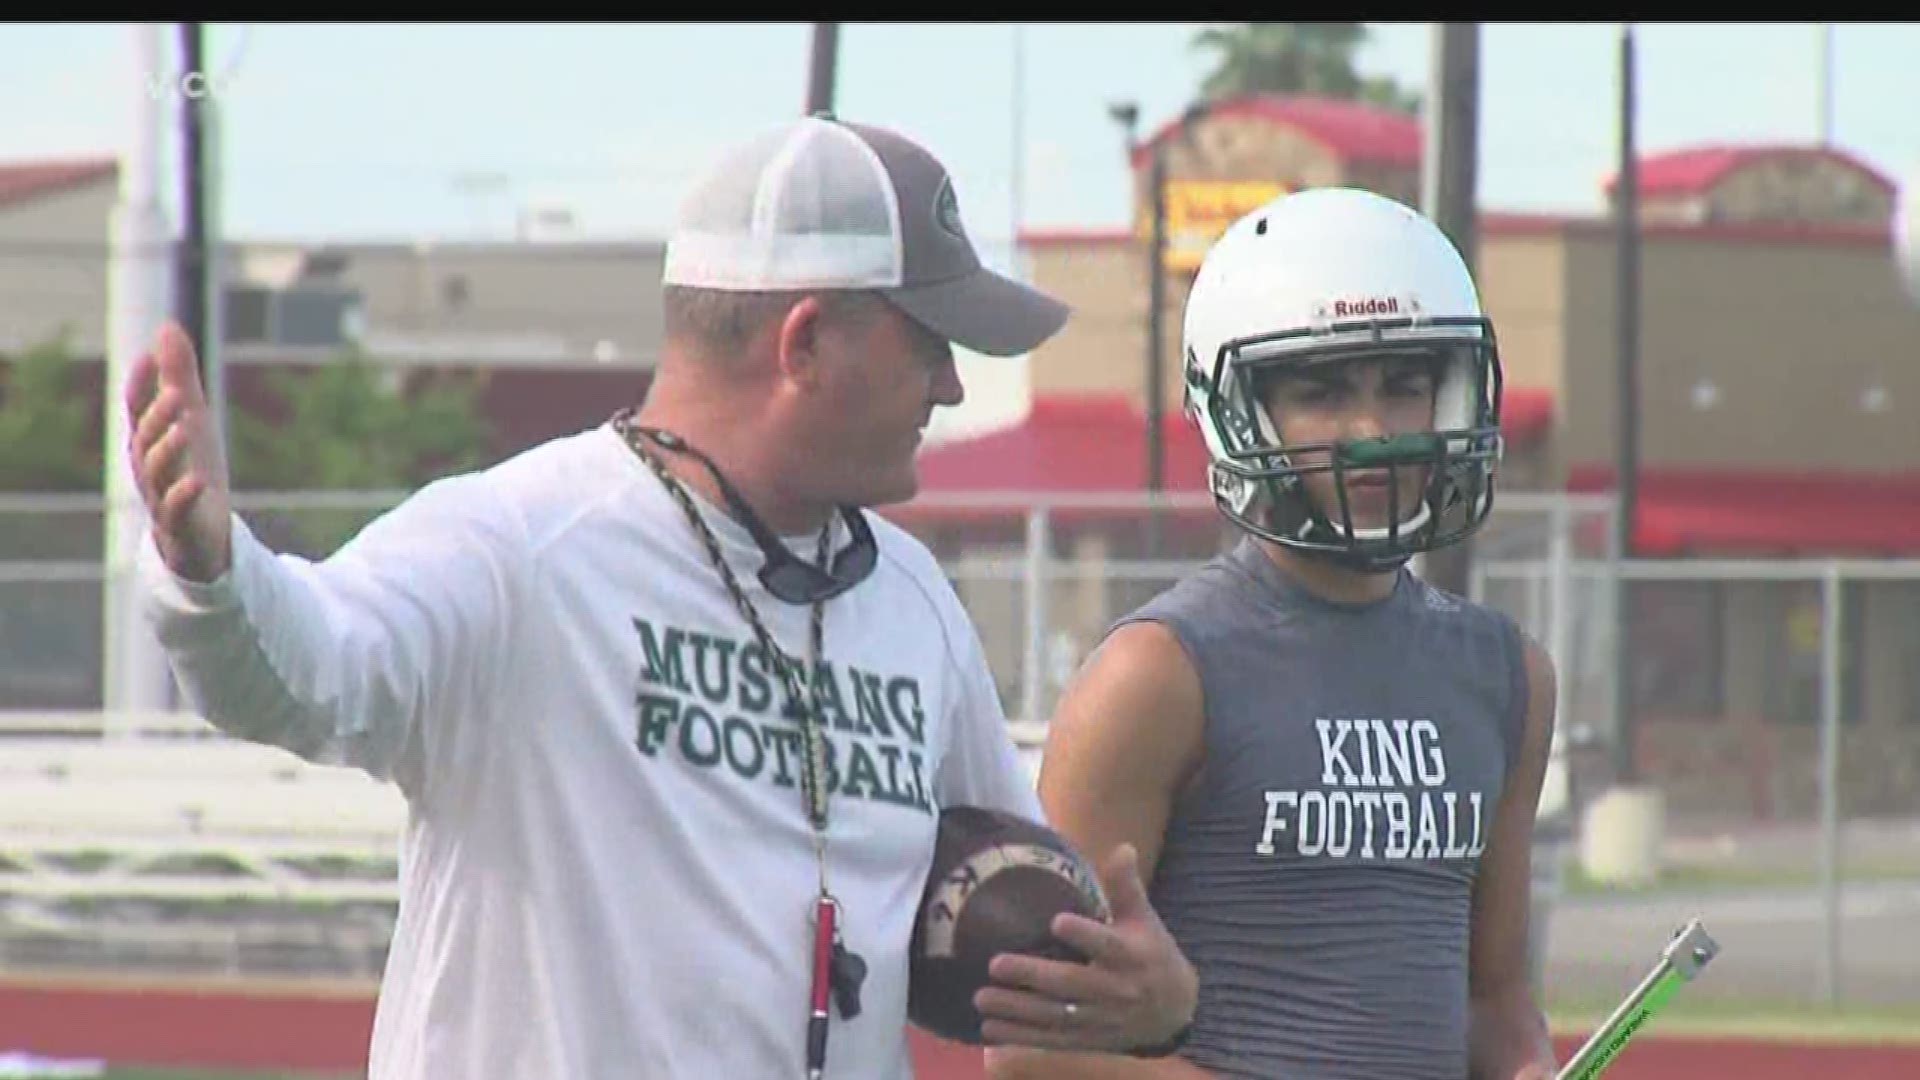 The Mustangs are looking for a bounce back year after a 2-8 season in 2017.